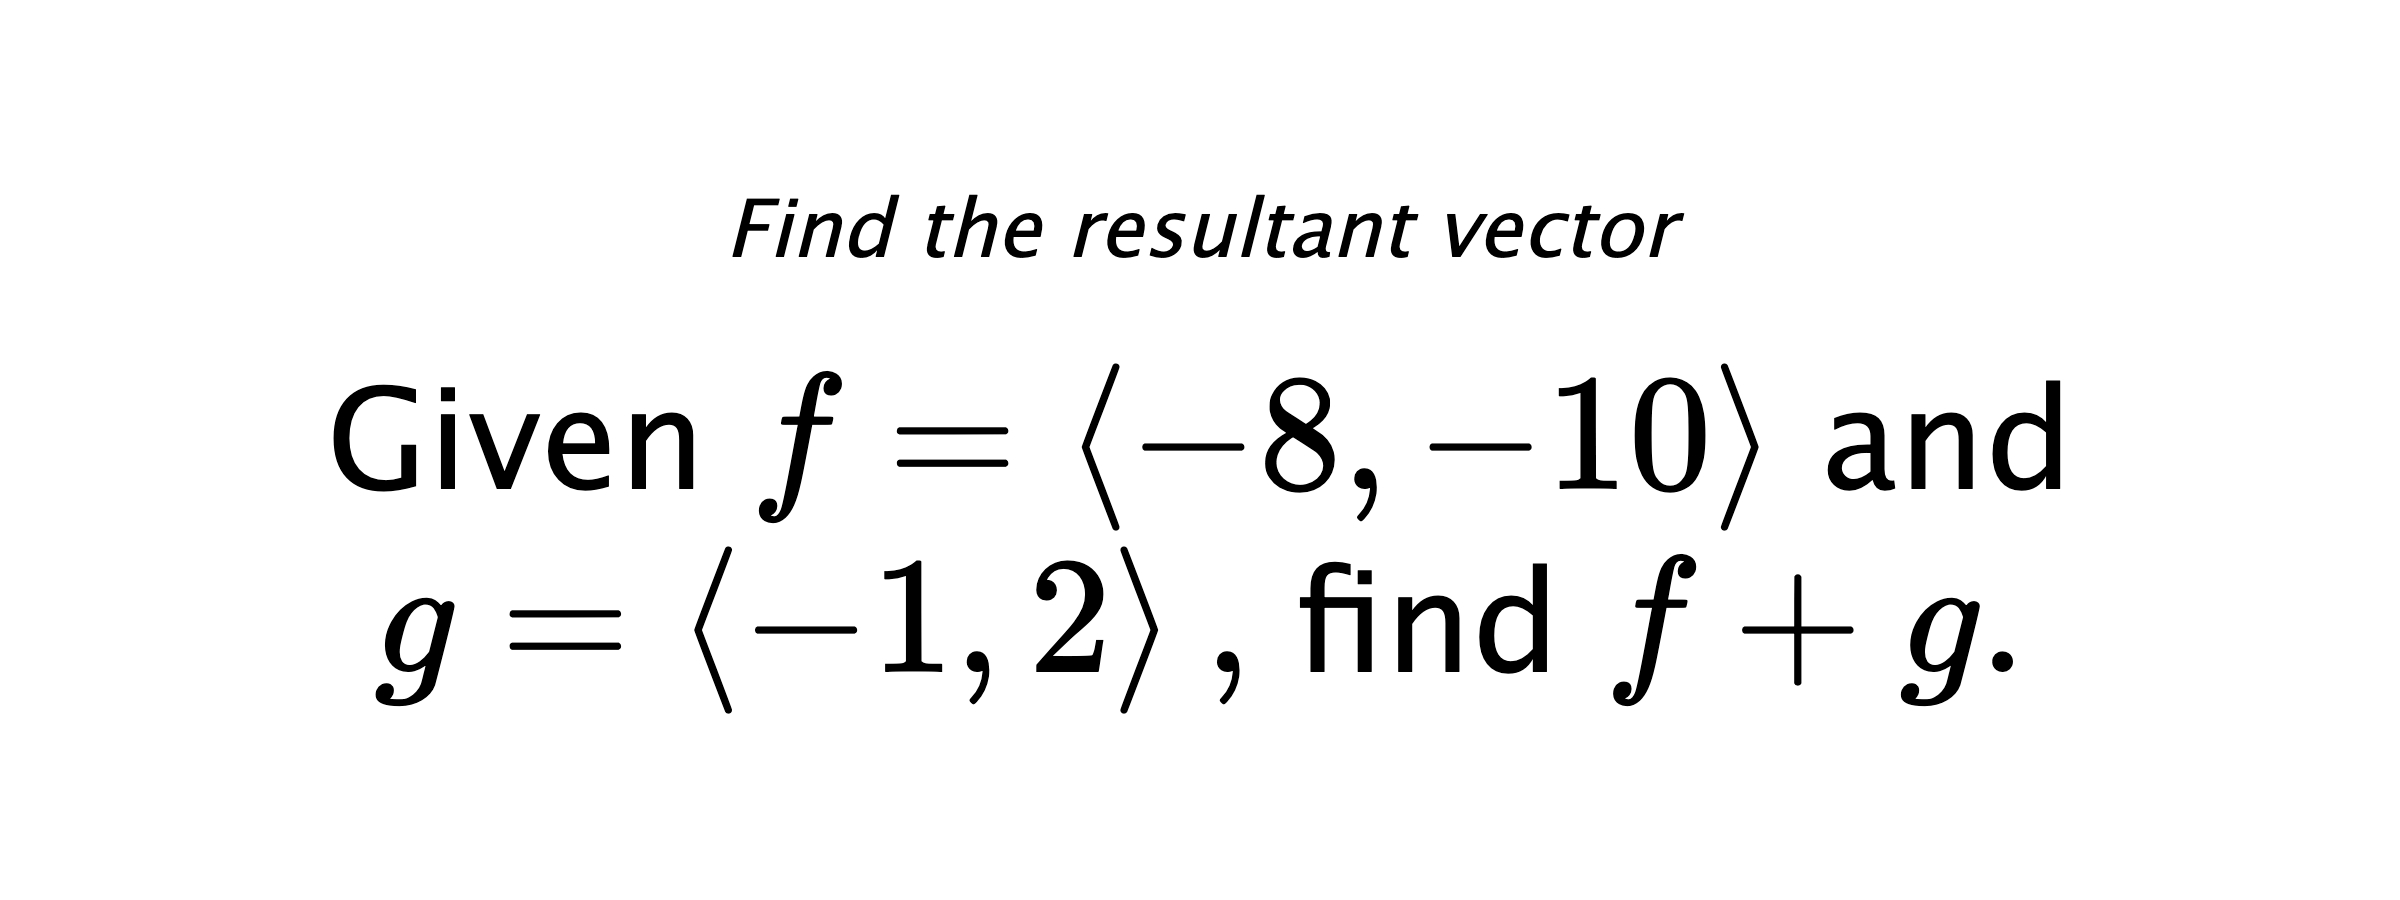 Find the resultant vector Given $ f = \left< -8,-10 \right> $ and $ g = \left< -1,2 \right> ,$ find $ f+g .$